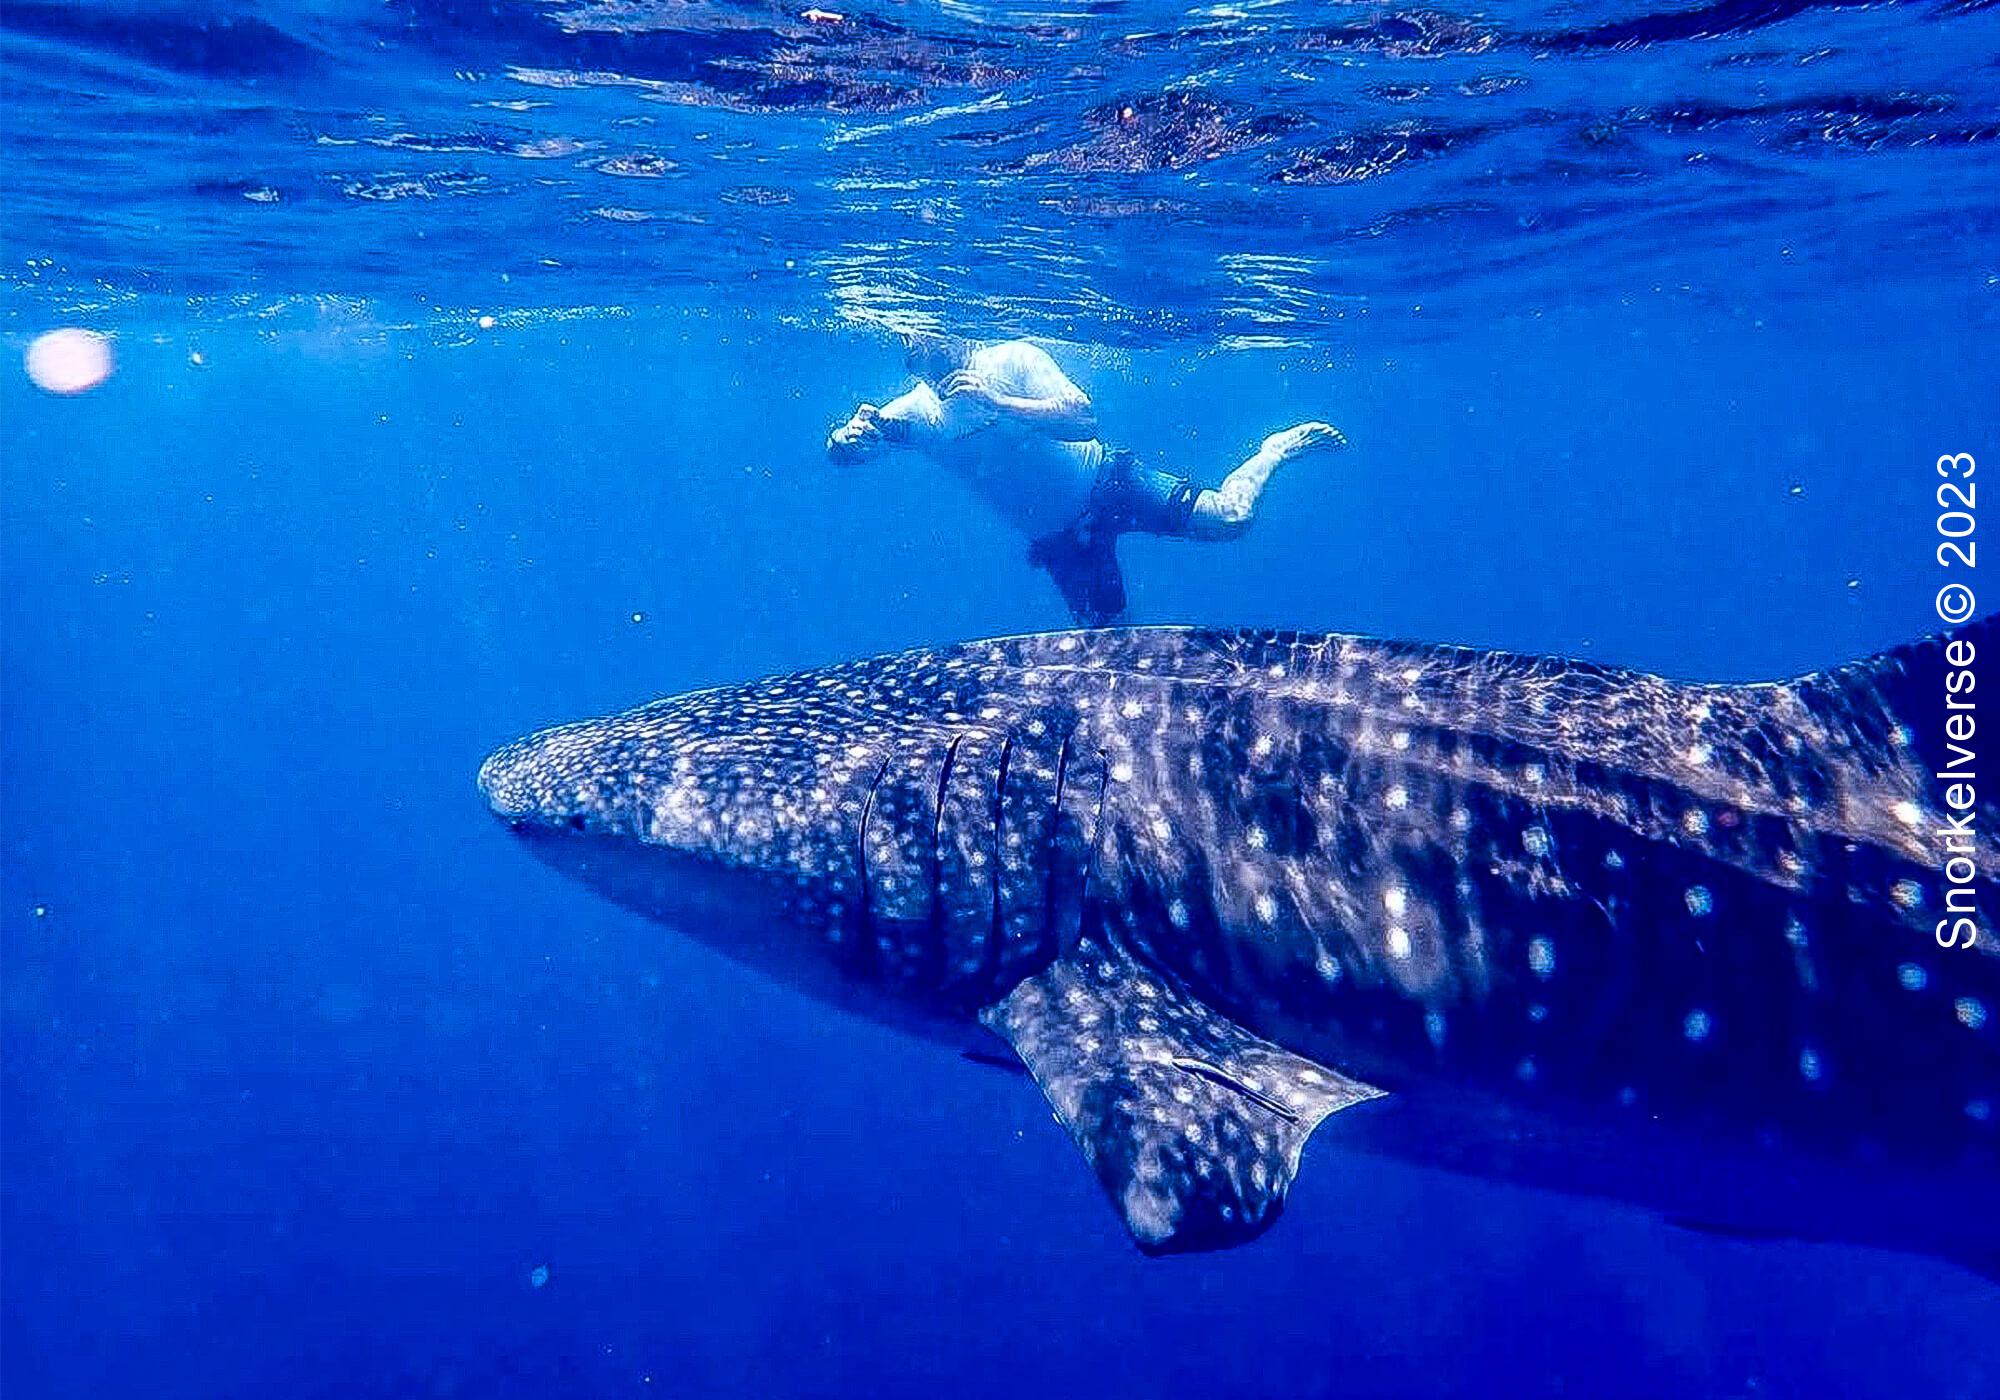 Luke Swimming With A Whale Shark